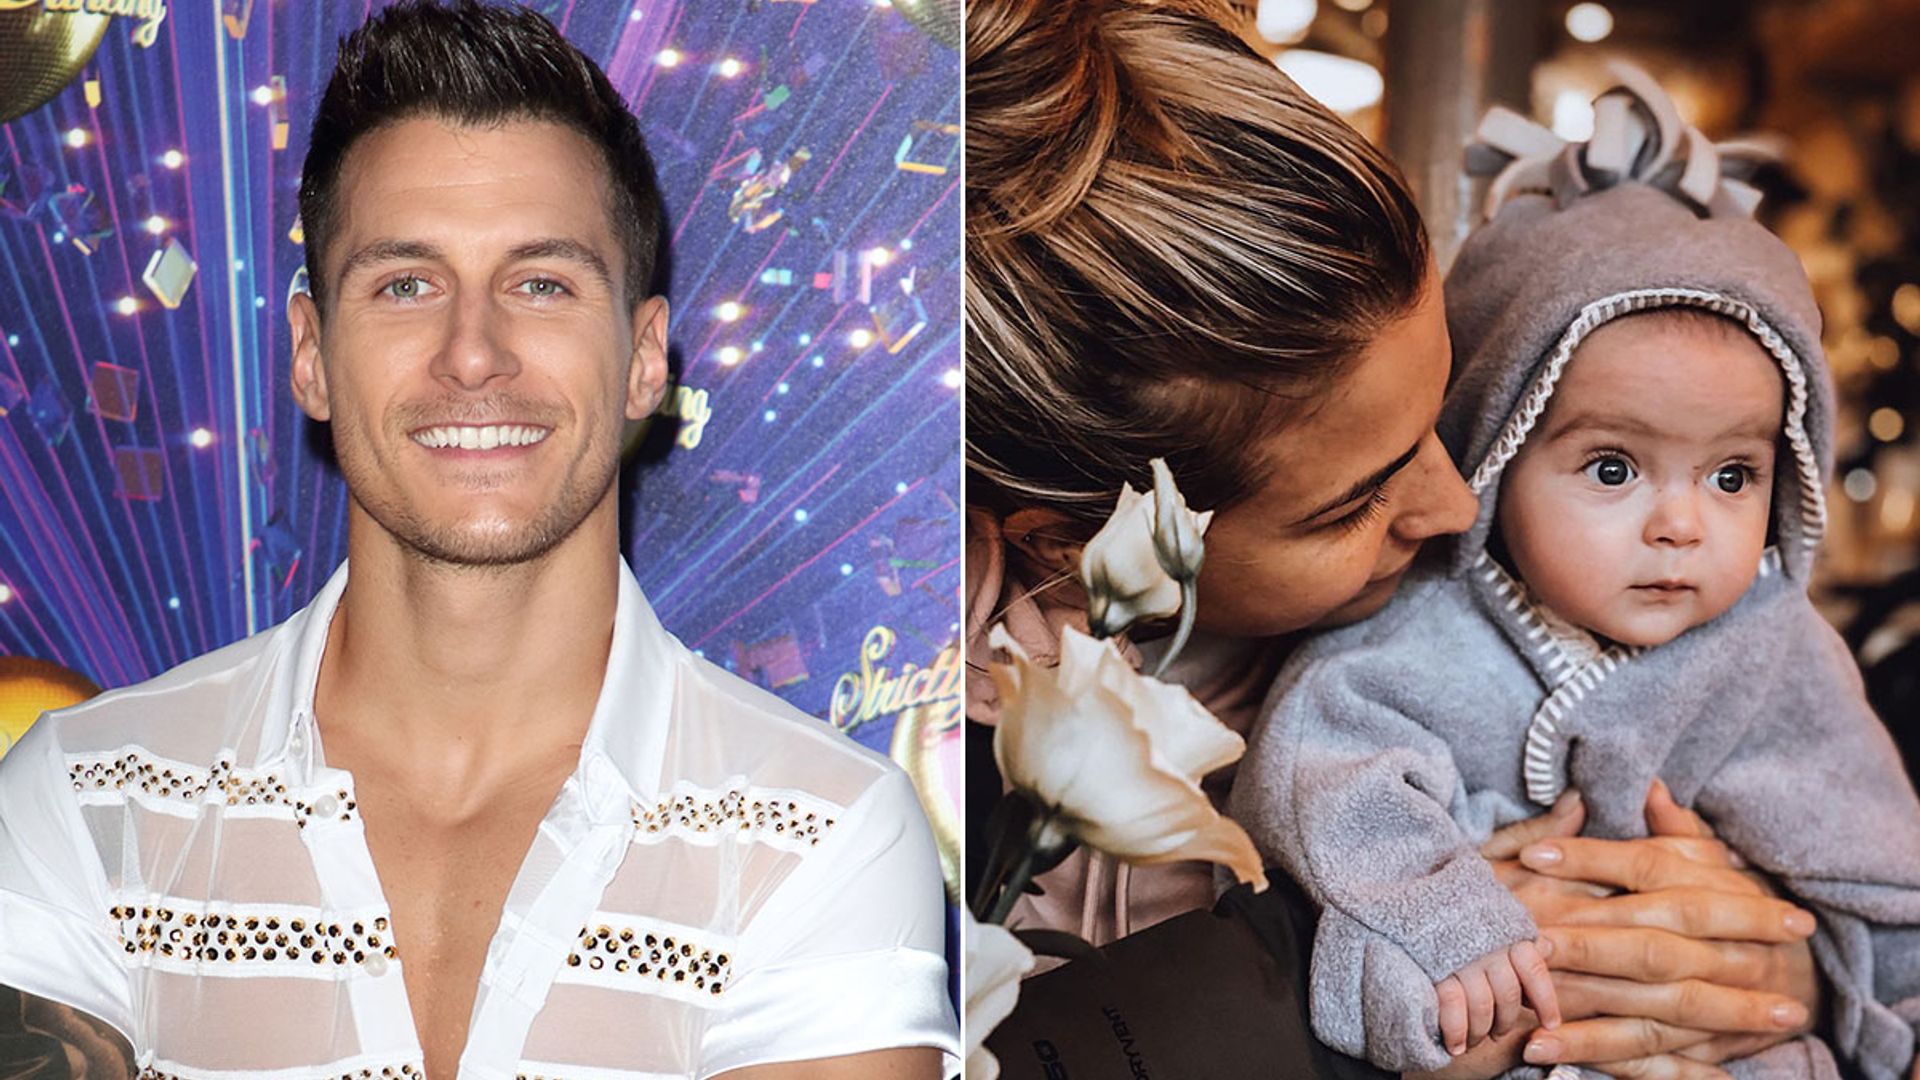 Gorka Marquez shares adorable snap of baby Mia sleeping - and fans coo over the cuteness overload